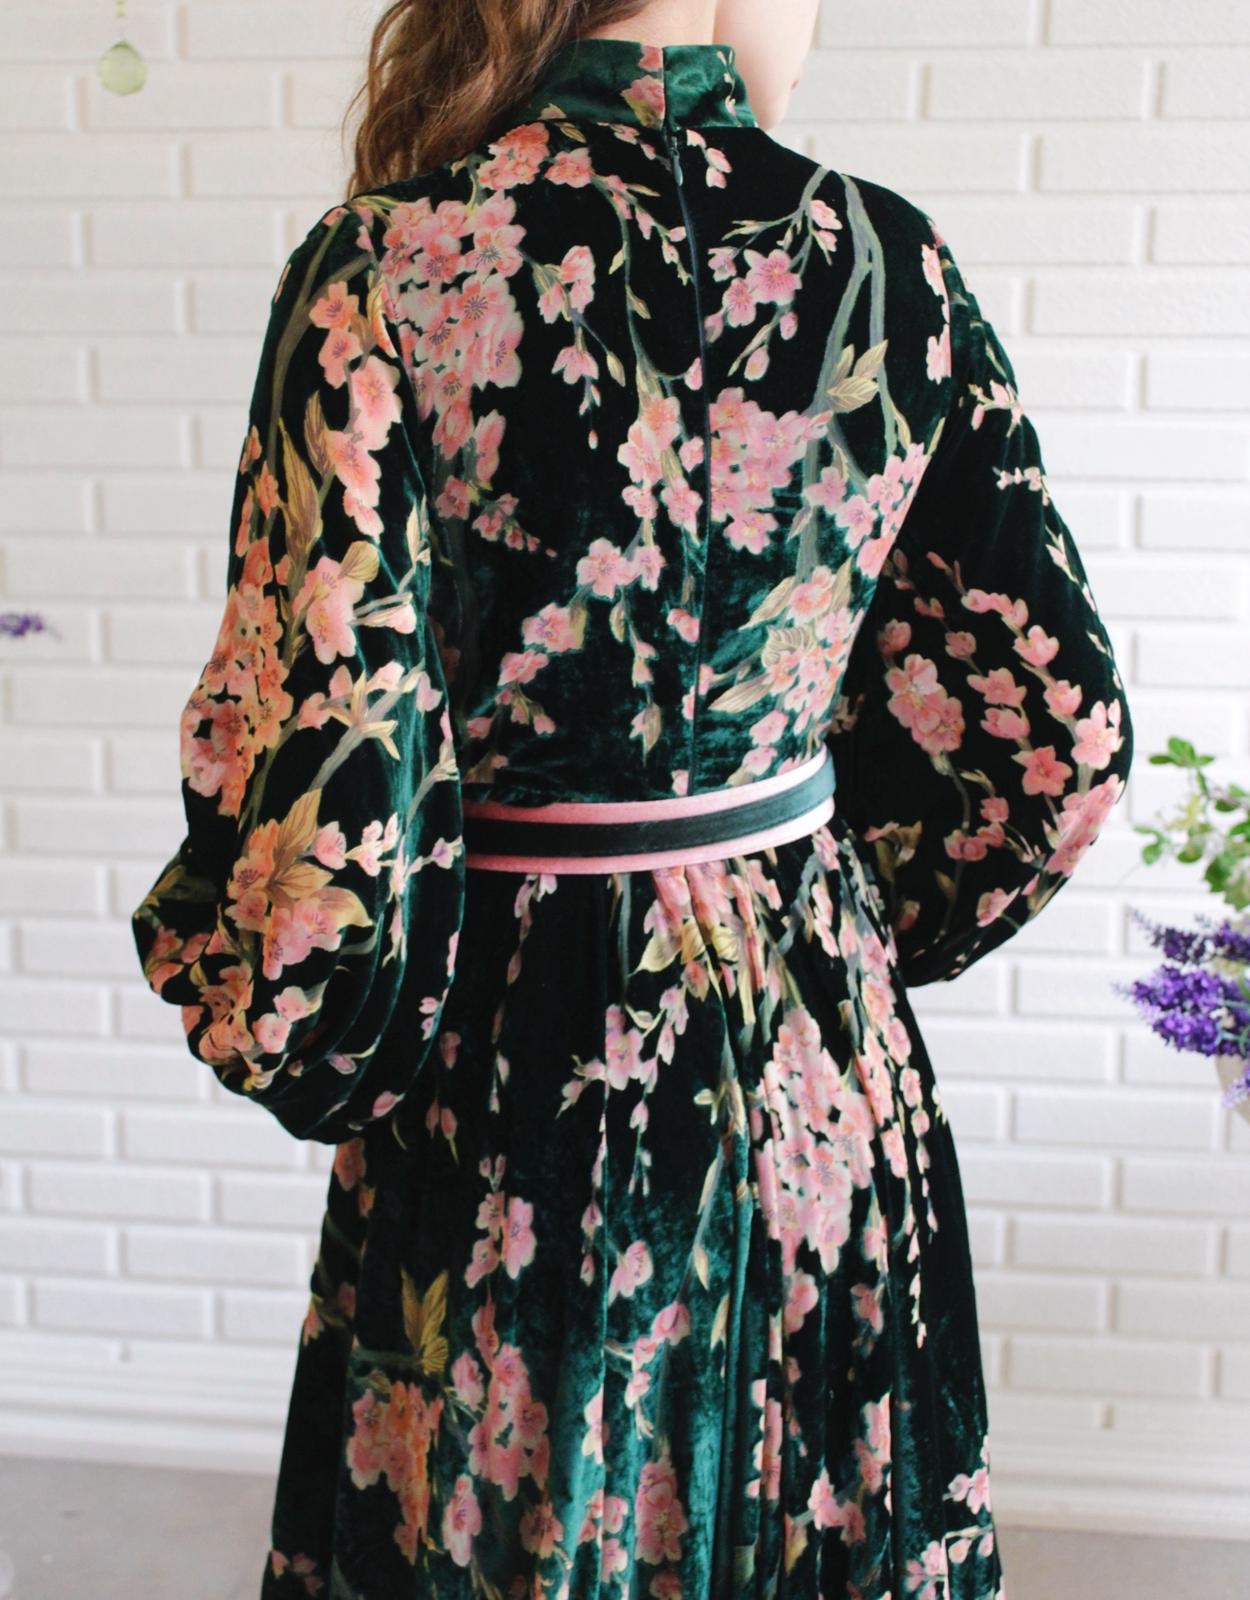 Green A-Line dress with v-neck, long sleeves and printed flowers